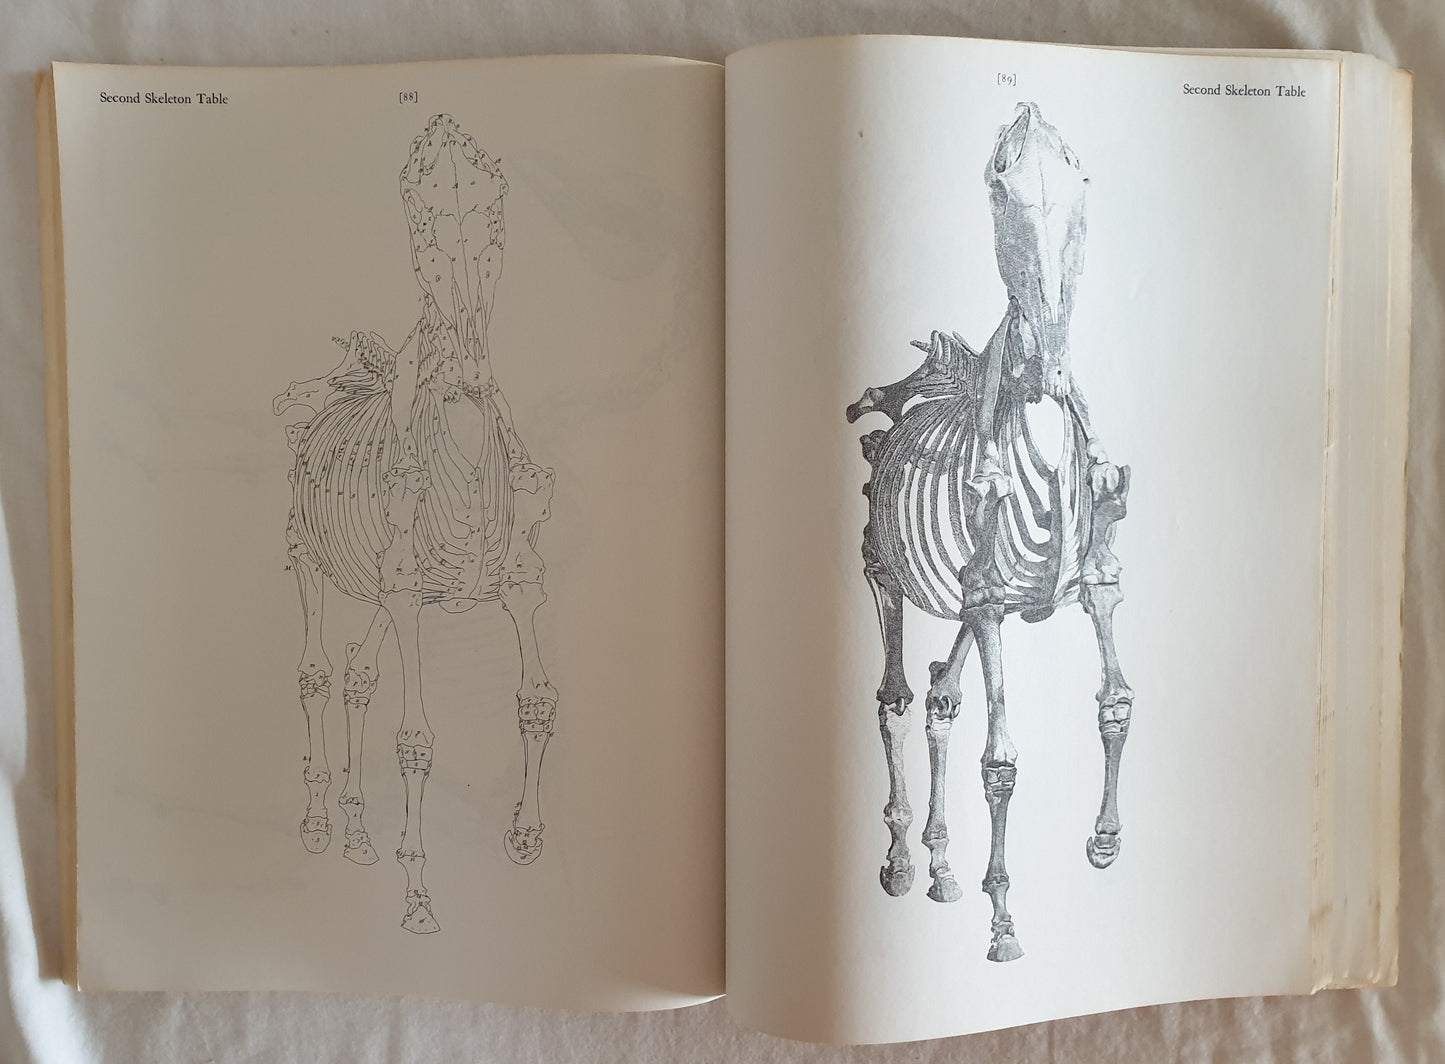 The Anatomy of the Horse by George Stubbs